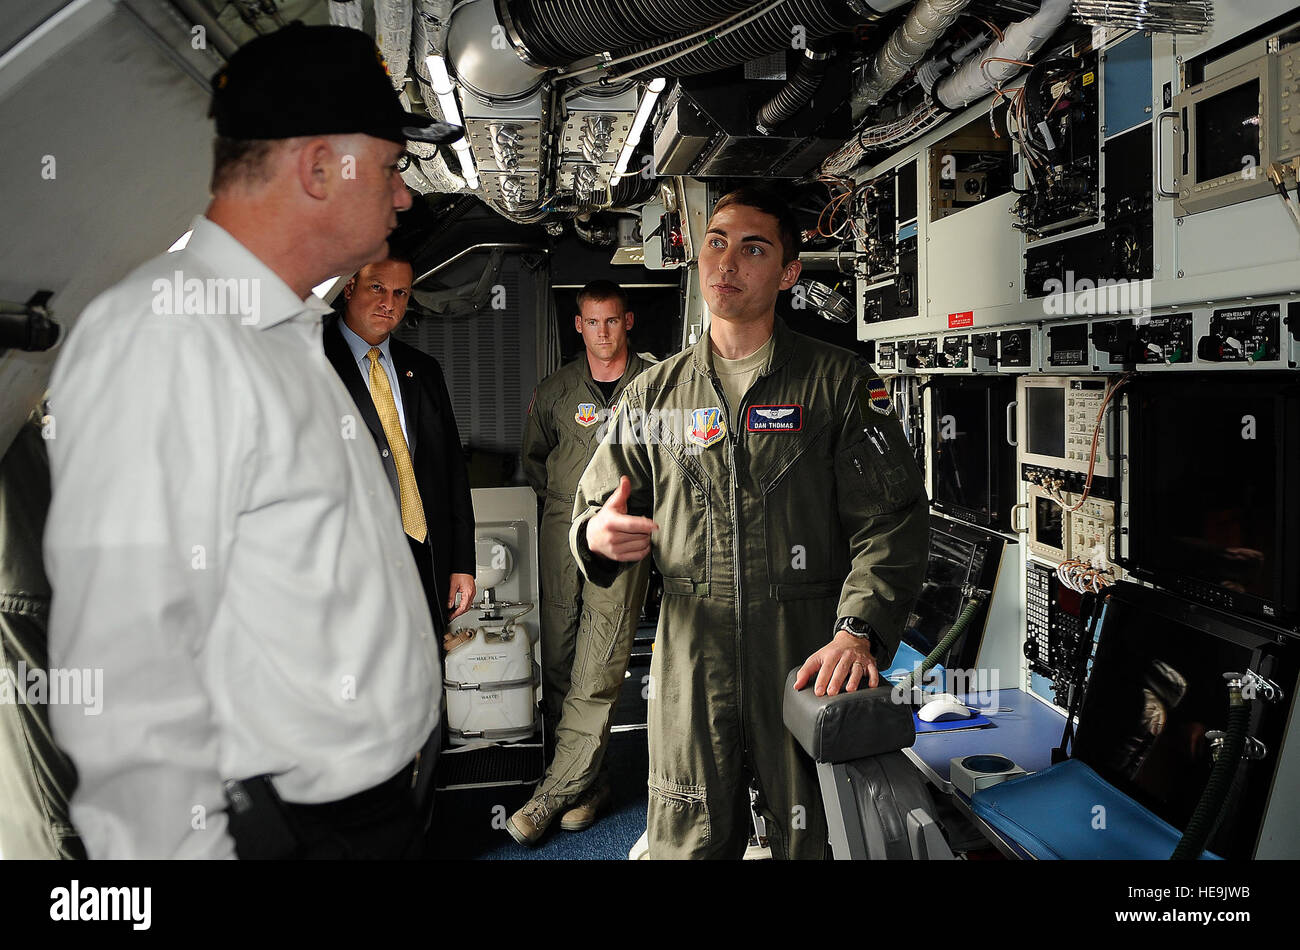 Deputy Secreatry of Defense WIlliam J. Lynn III talks with Air Force Captain Dan Thomas, RC-135 Rivet Joint aircrew member while on a visit to Offutt Air Force Base, Neb., May 26, 2010.  Master Sgt. Jerry Morrison() Stock Photo